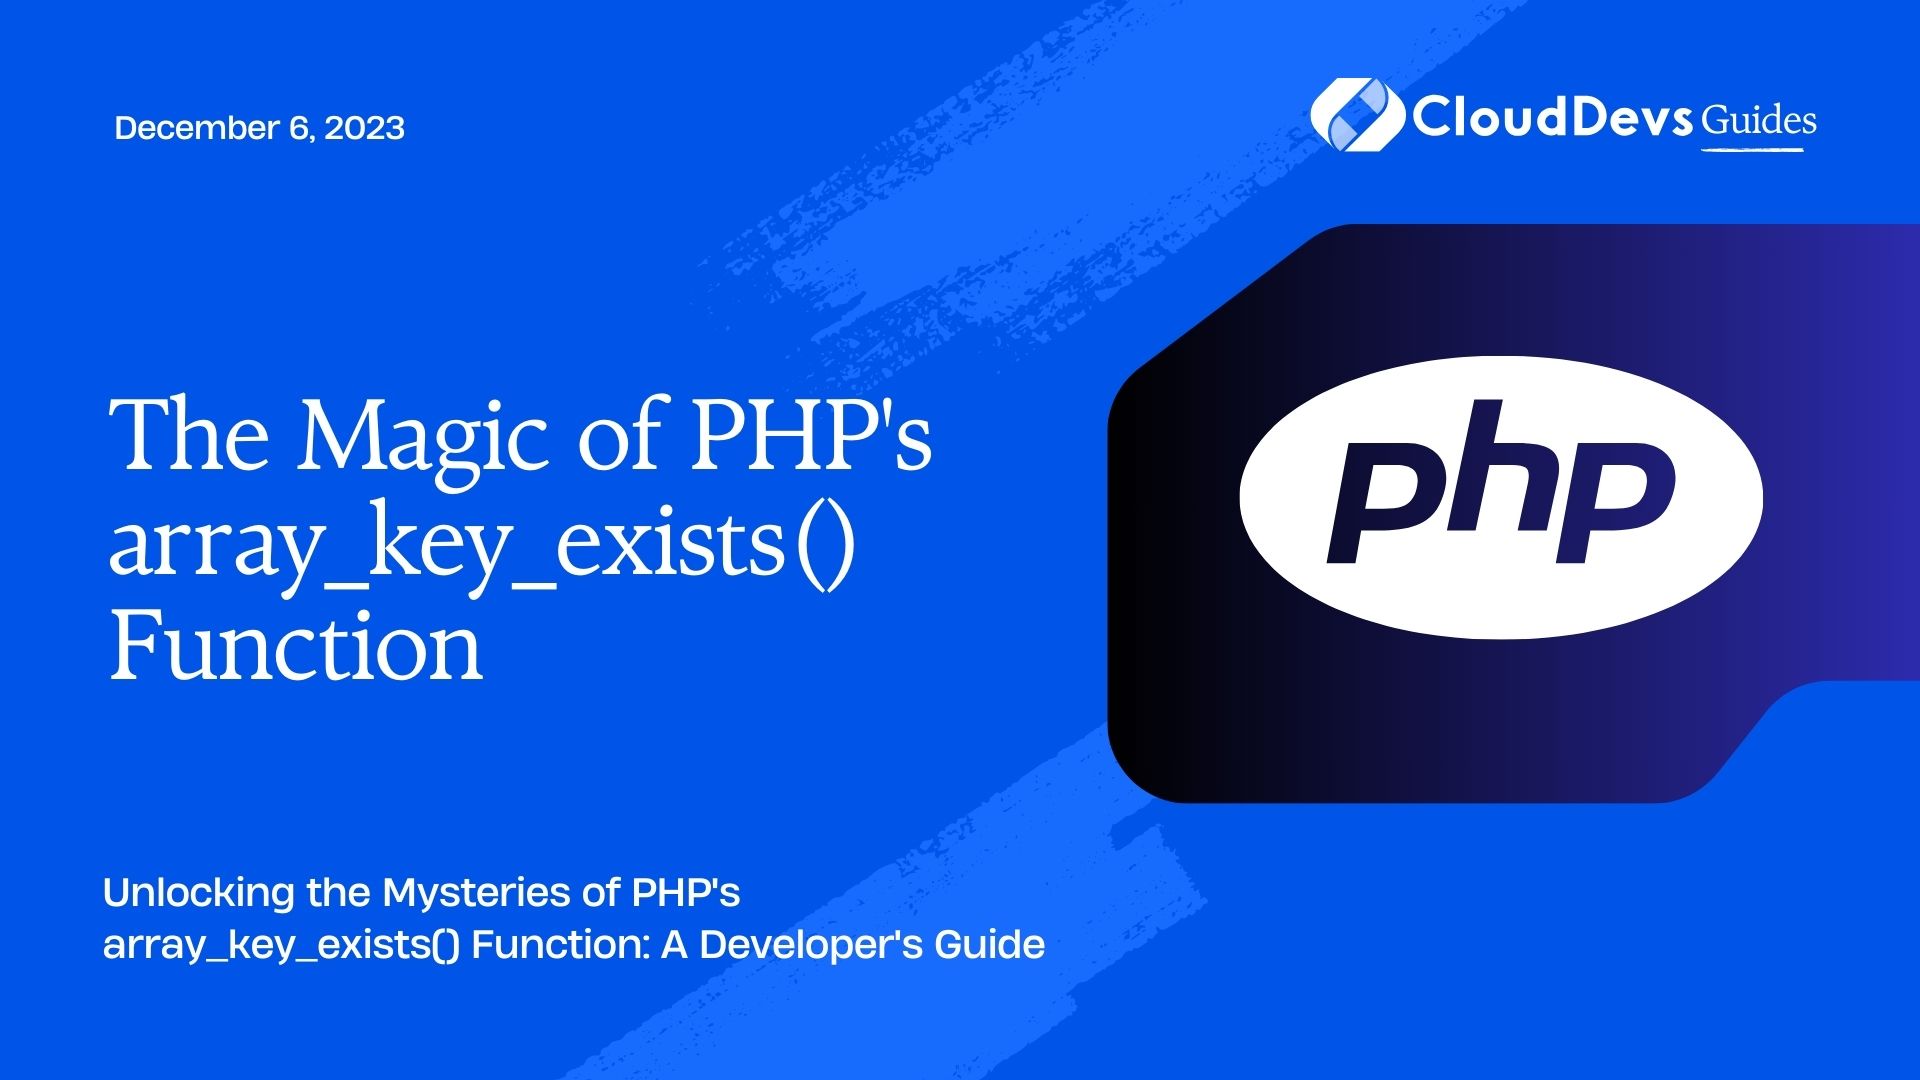 The Magic of PHP's array_key_exists() Function